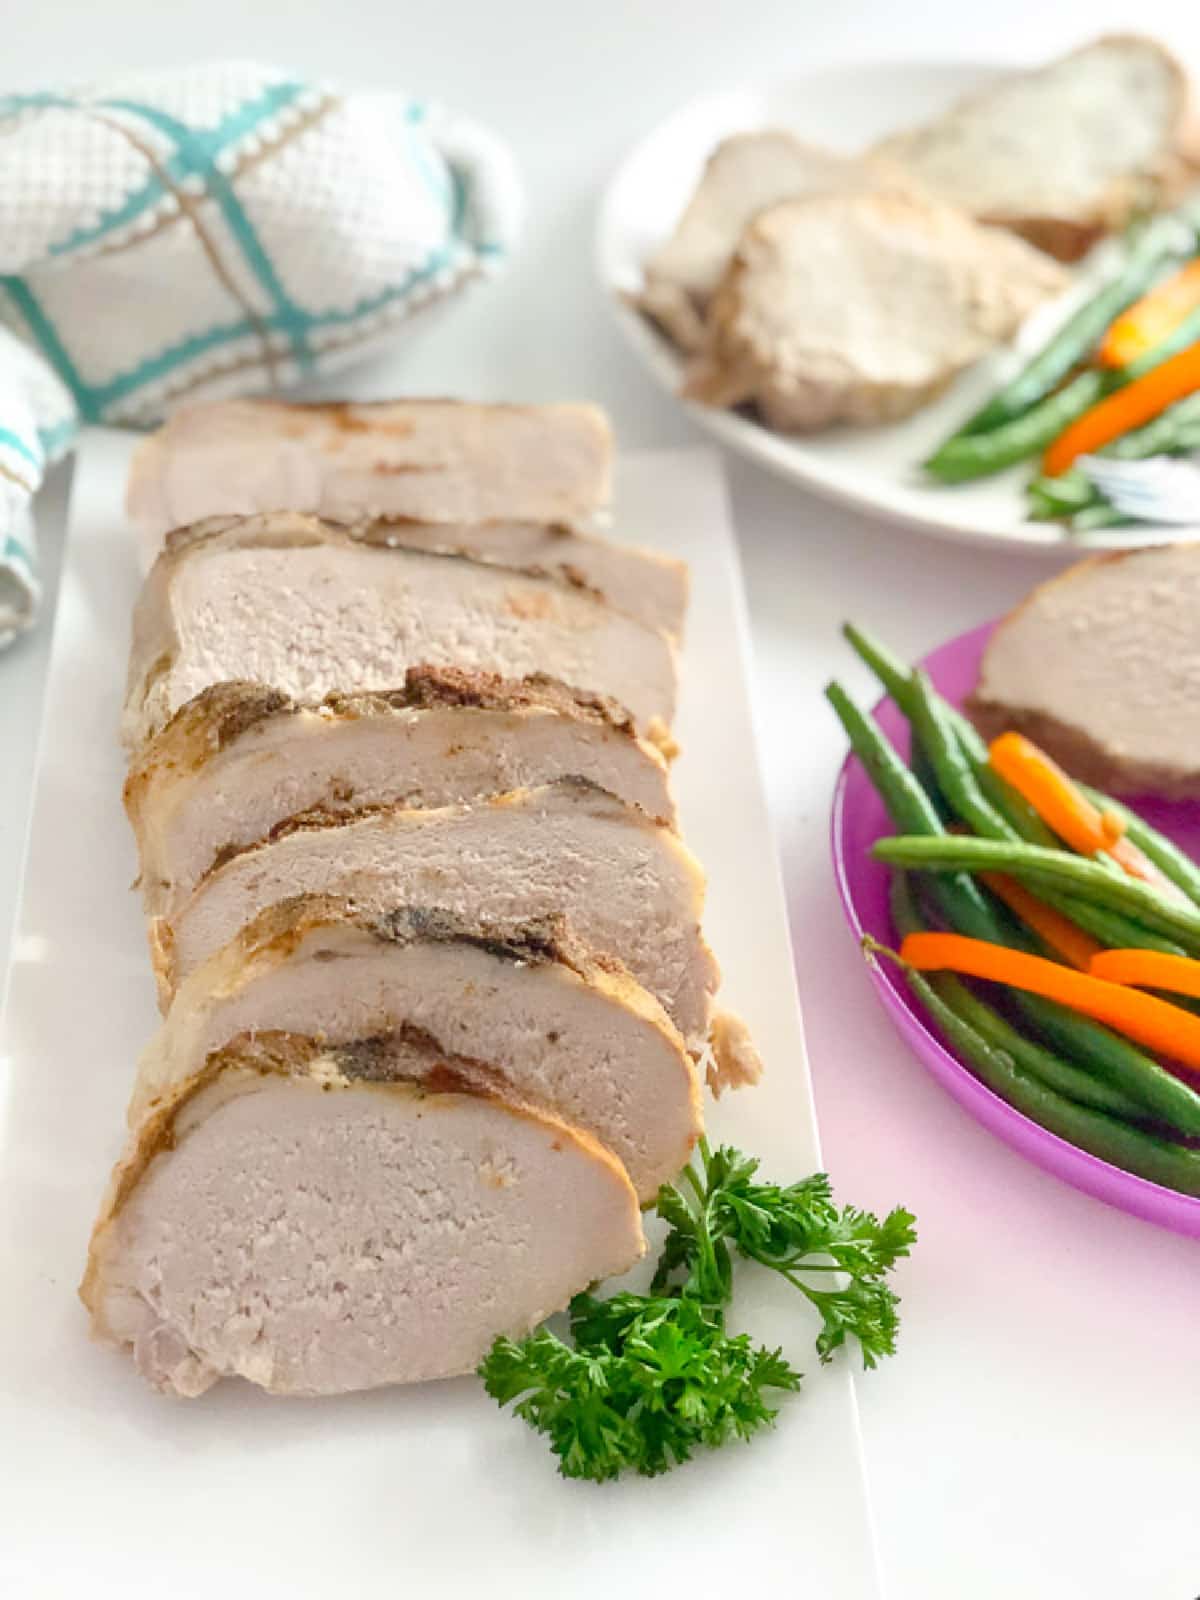 Sliced pork loin on a platter with two dinner plates with green beans and carrots next to the platter.